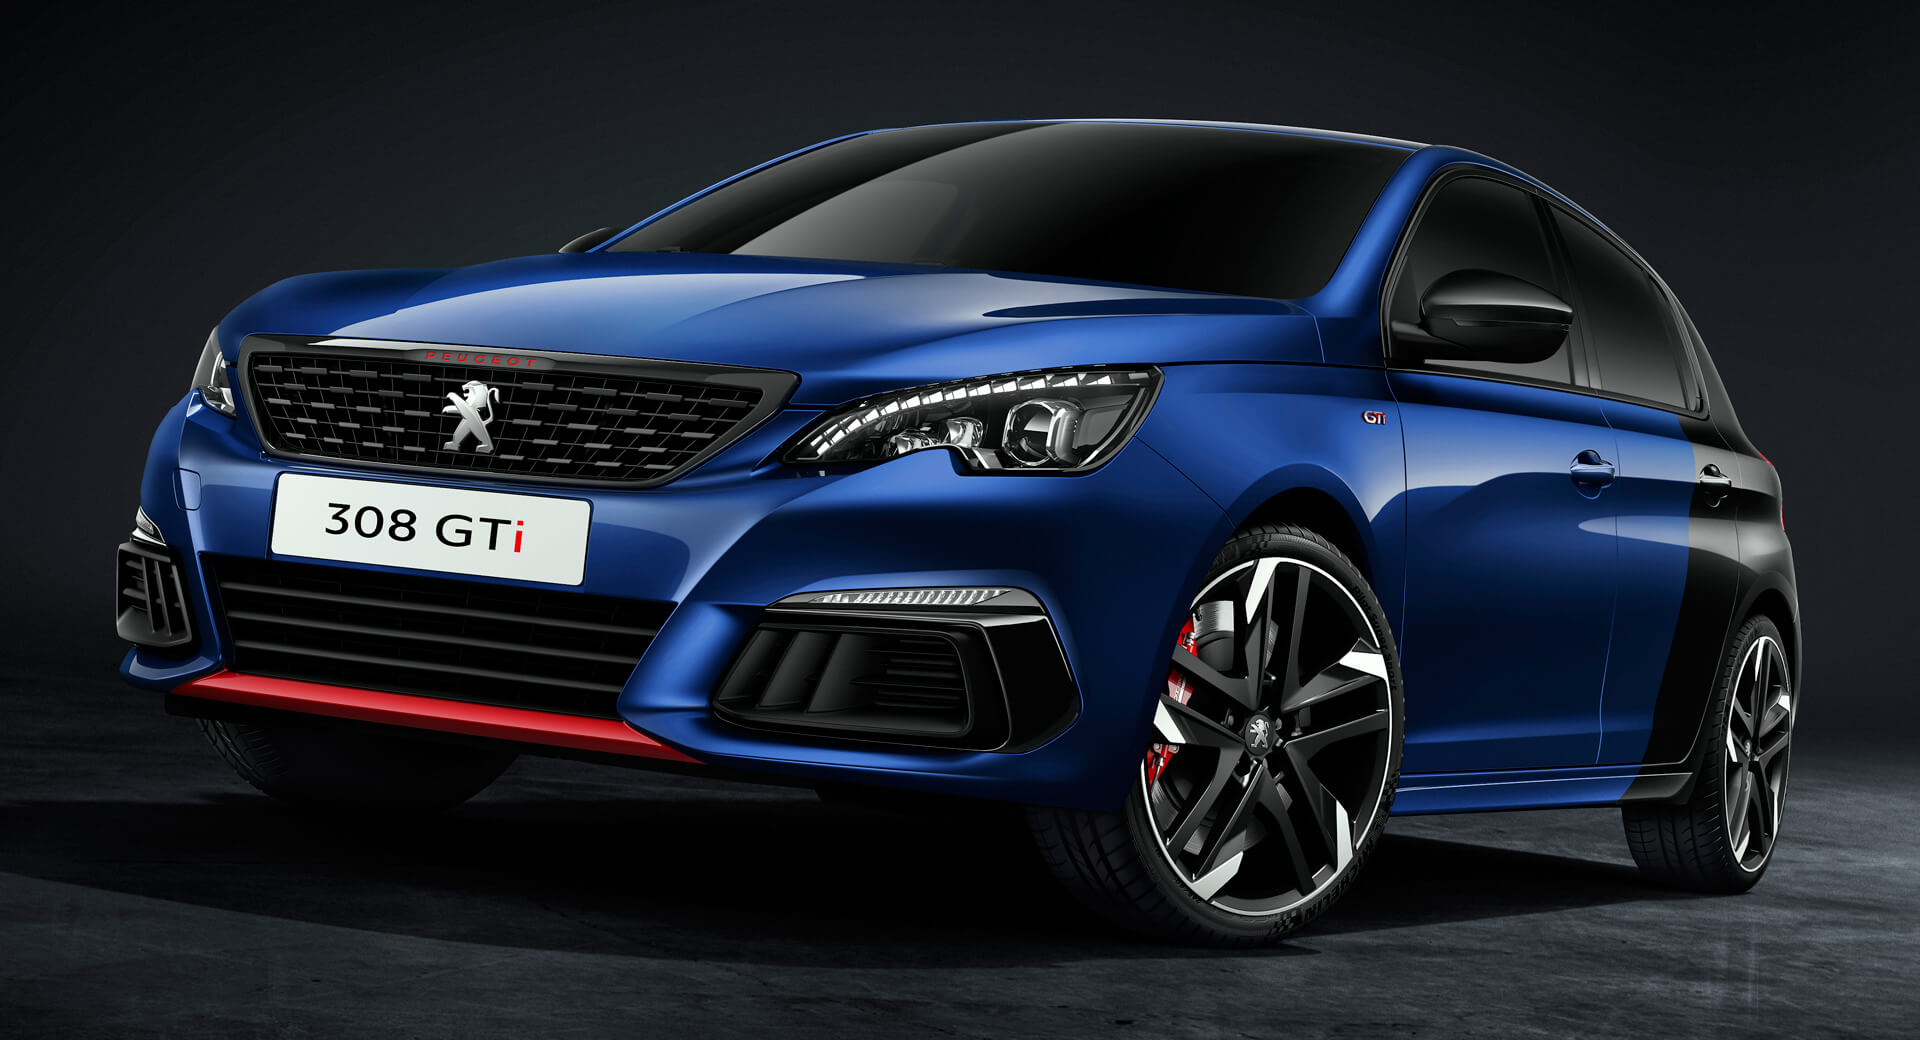 Peugeot takes on VW yet again with the new 308 GTi - Autoblog